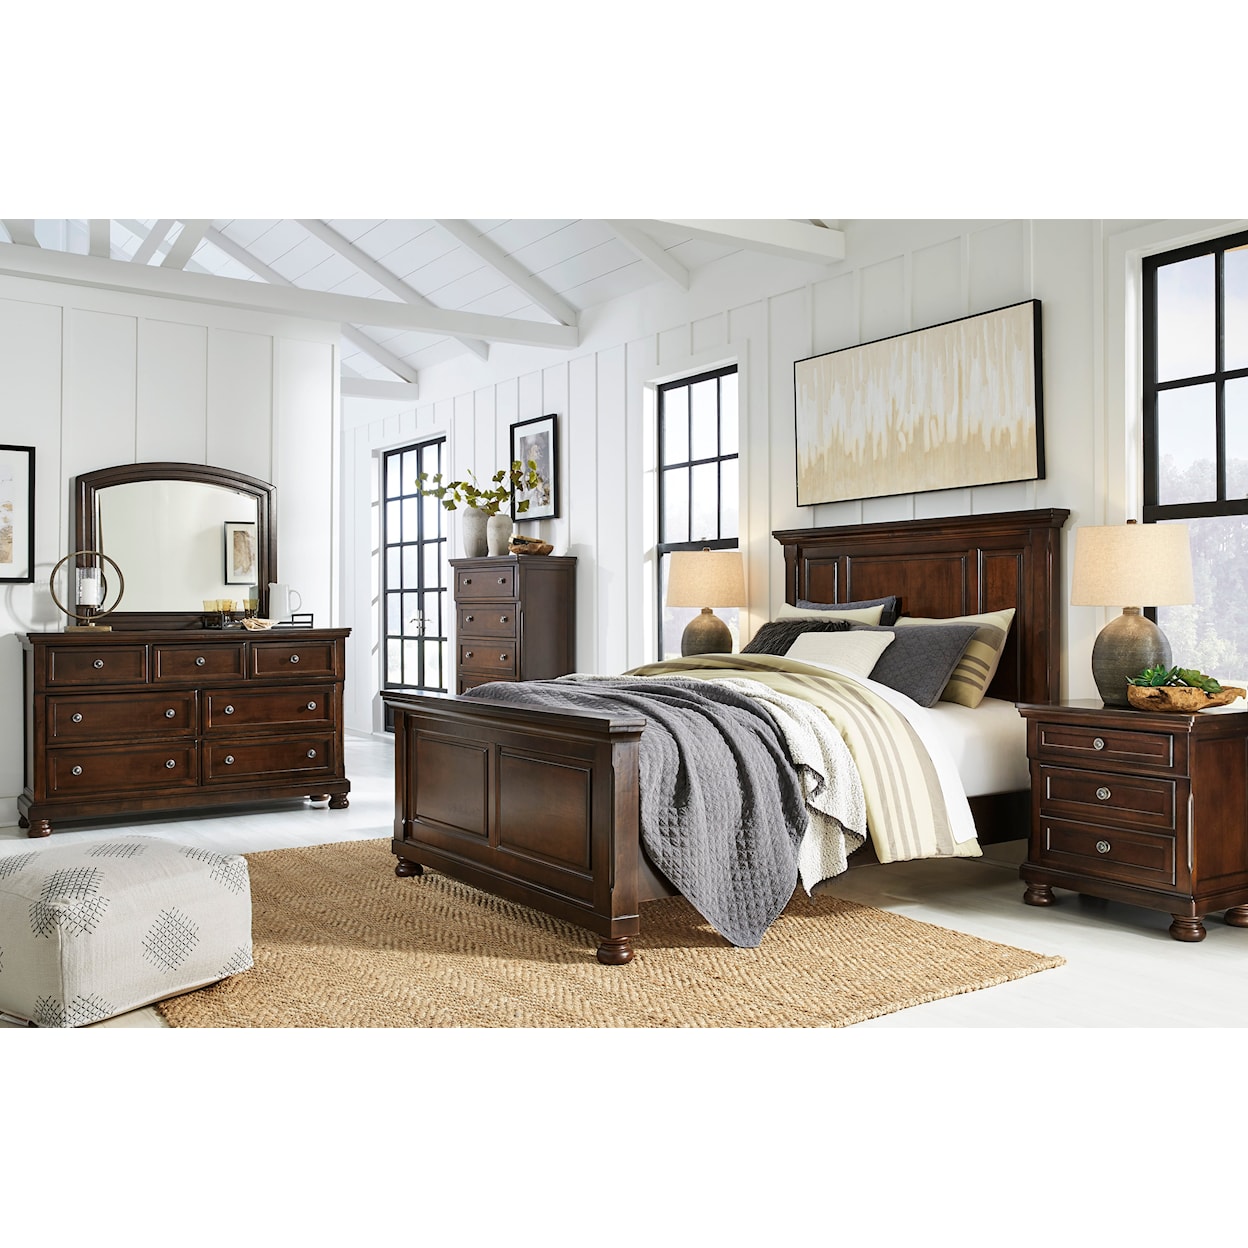 Ashley Furniture Porter House Queen Bedroom Group